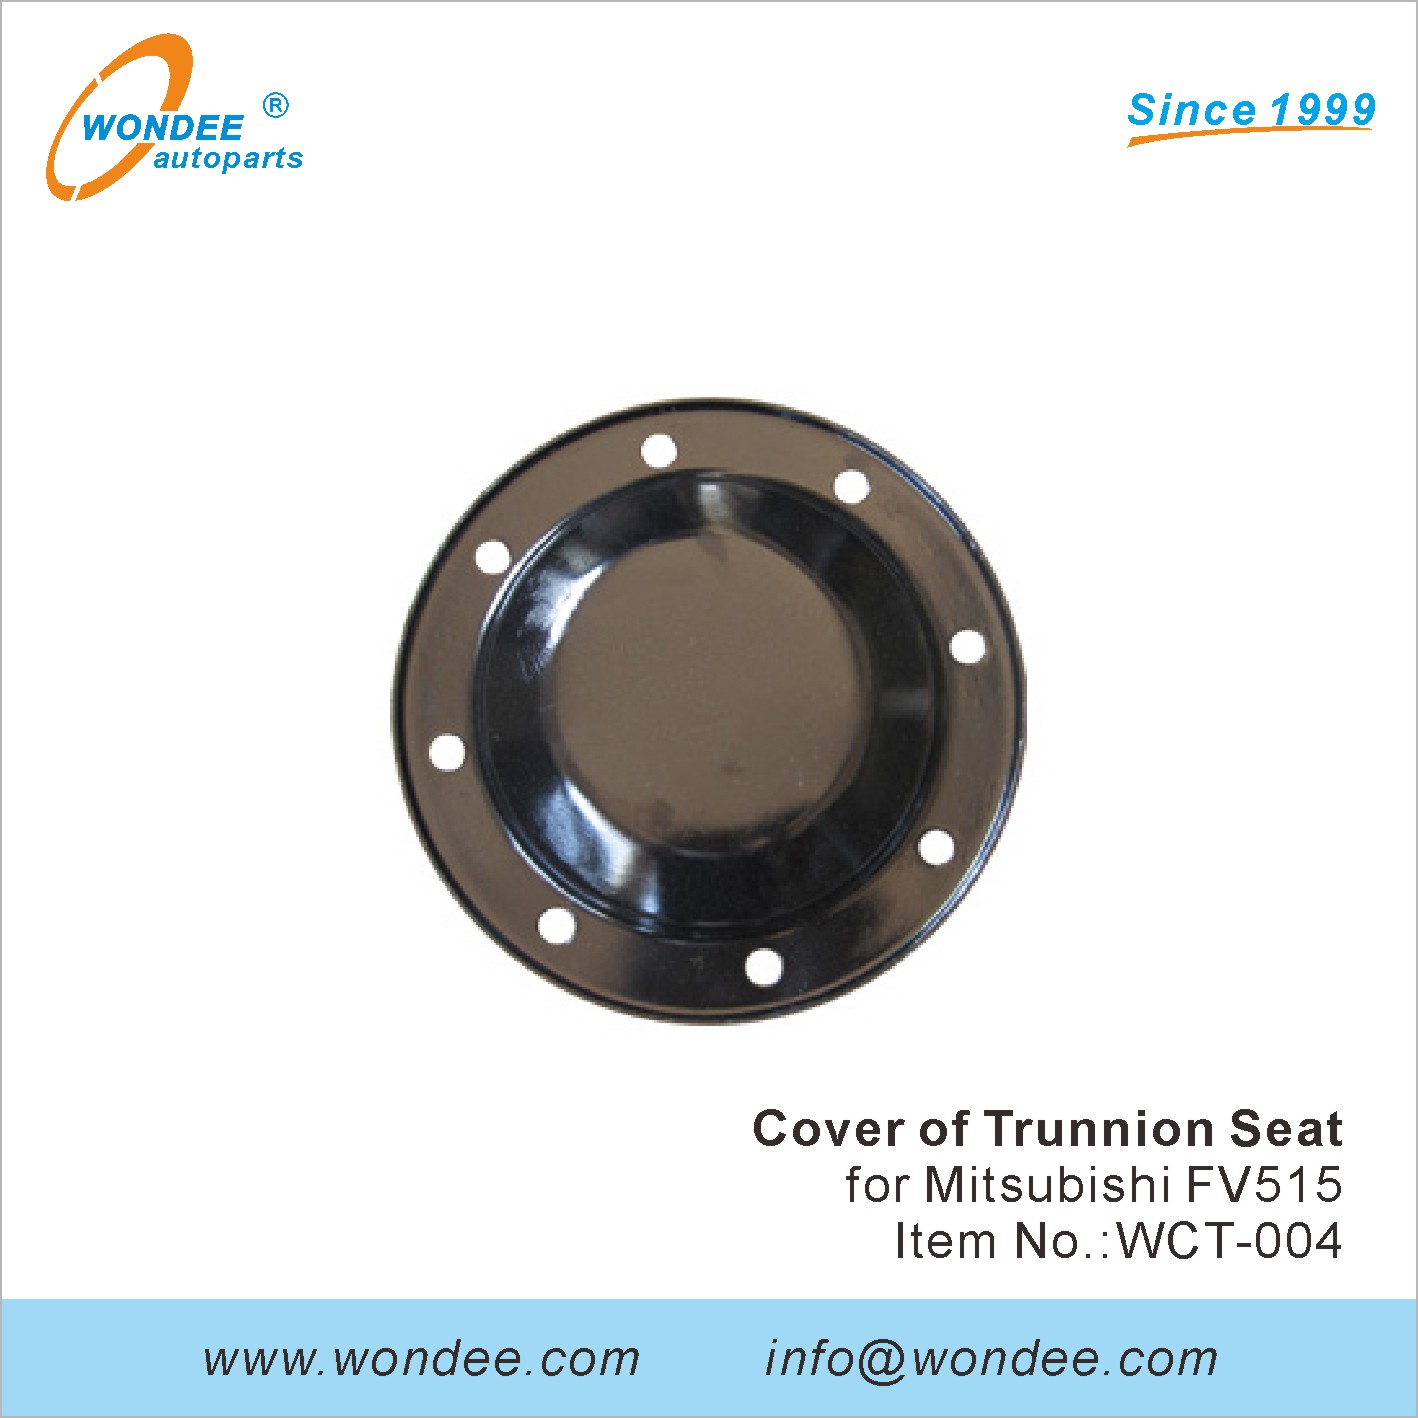 WONDEE cover of trunnion seat (4)